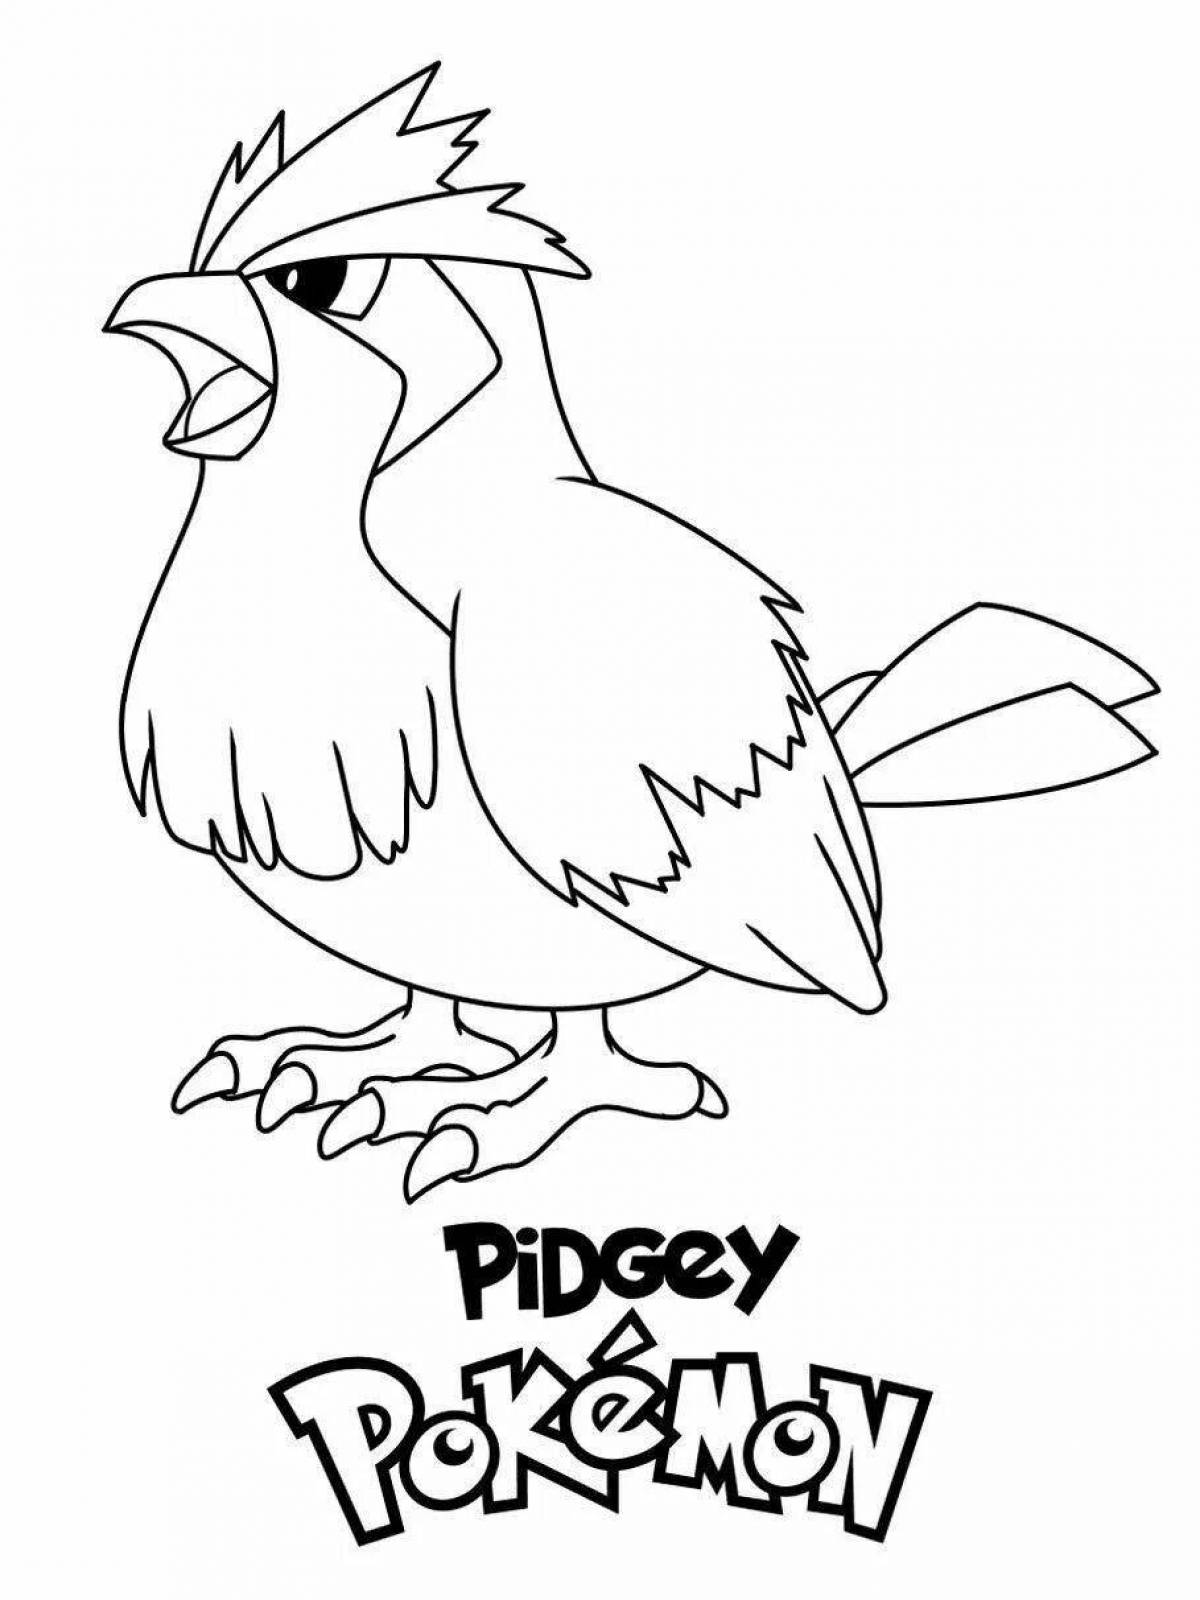 Color filled pj coloring page